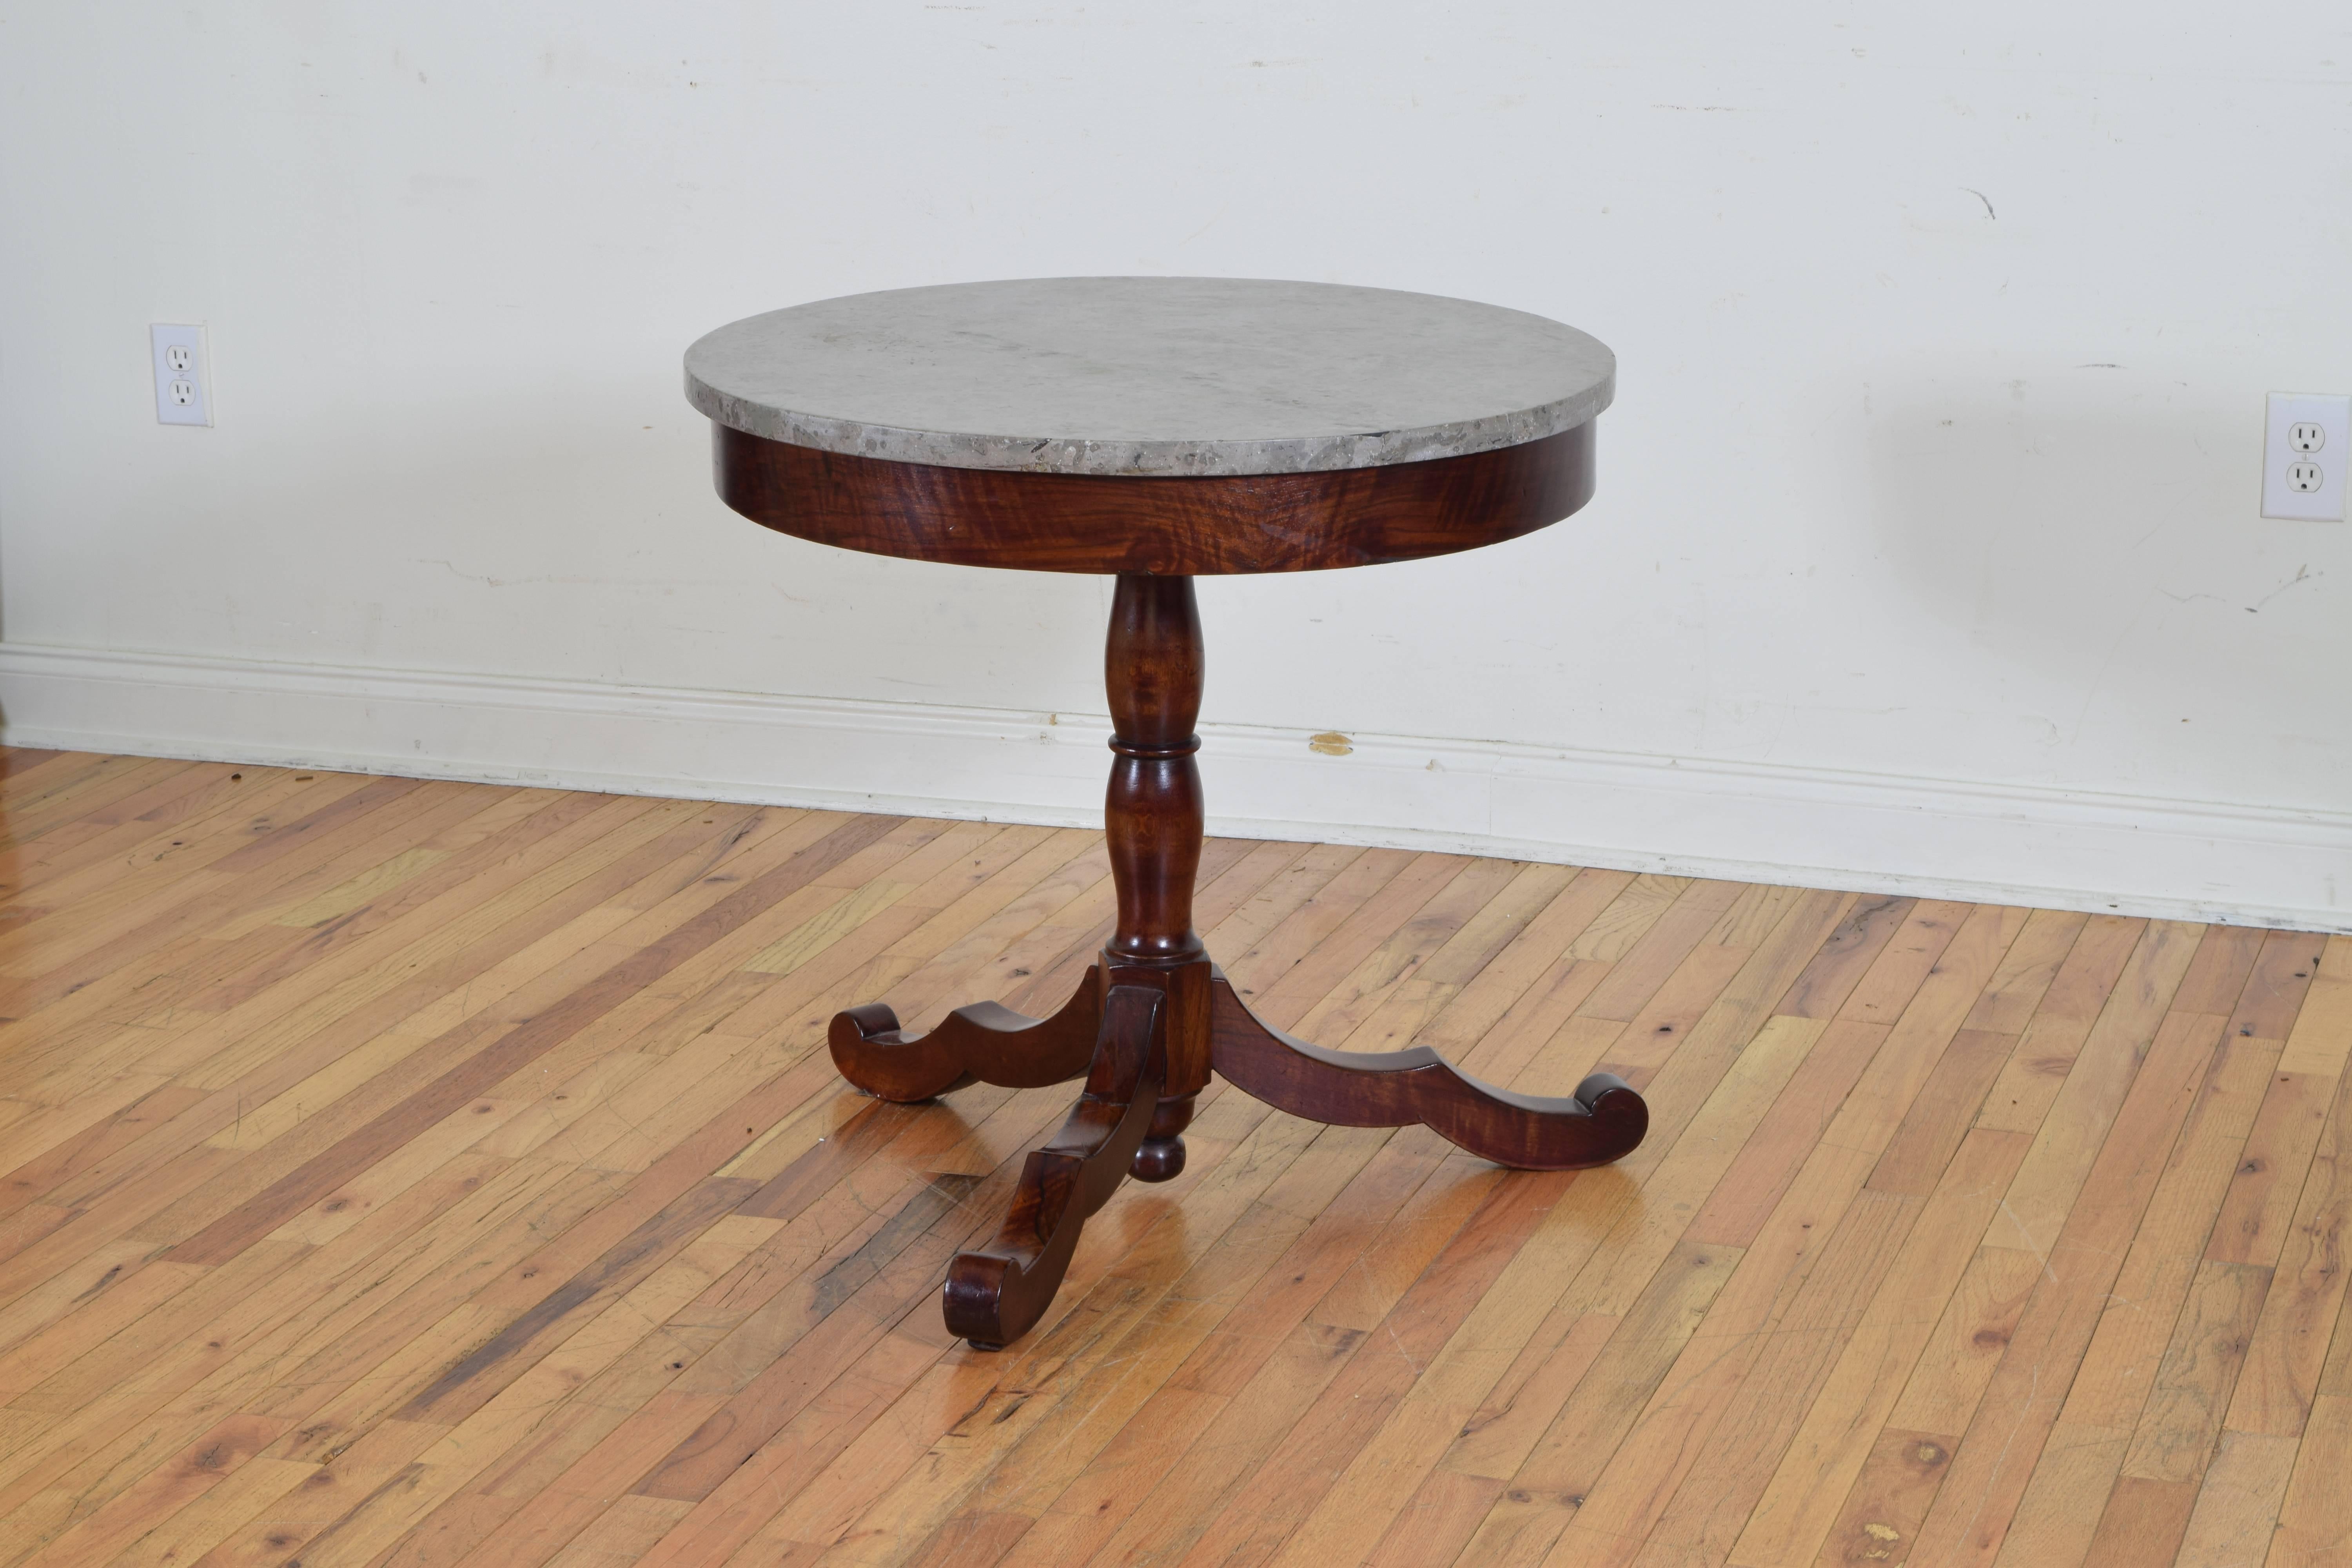 19th Century Italian Late Neoclassical Period Mahogany and Marble-Top Center Table circa 1840